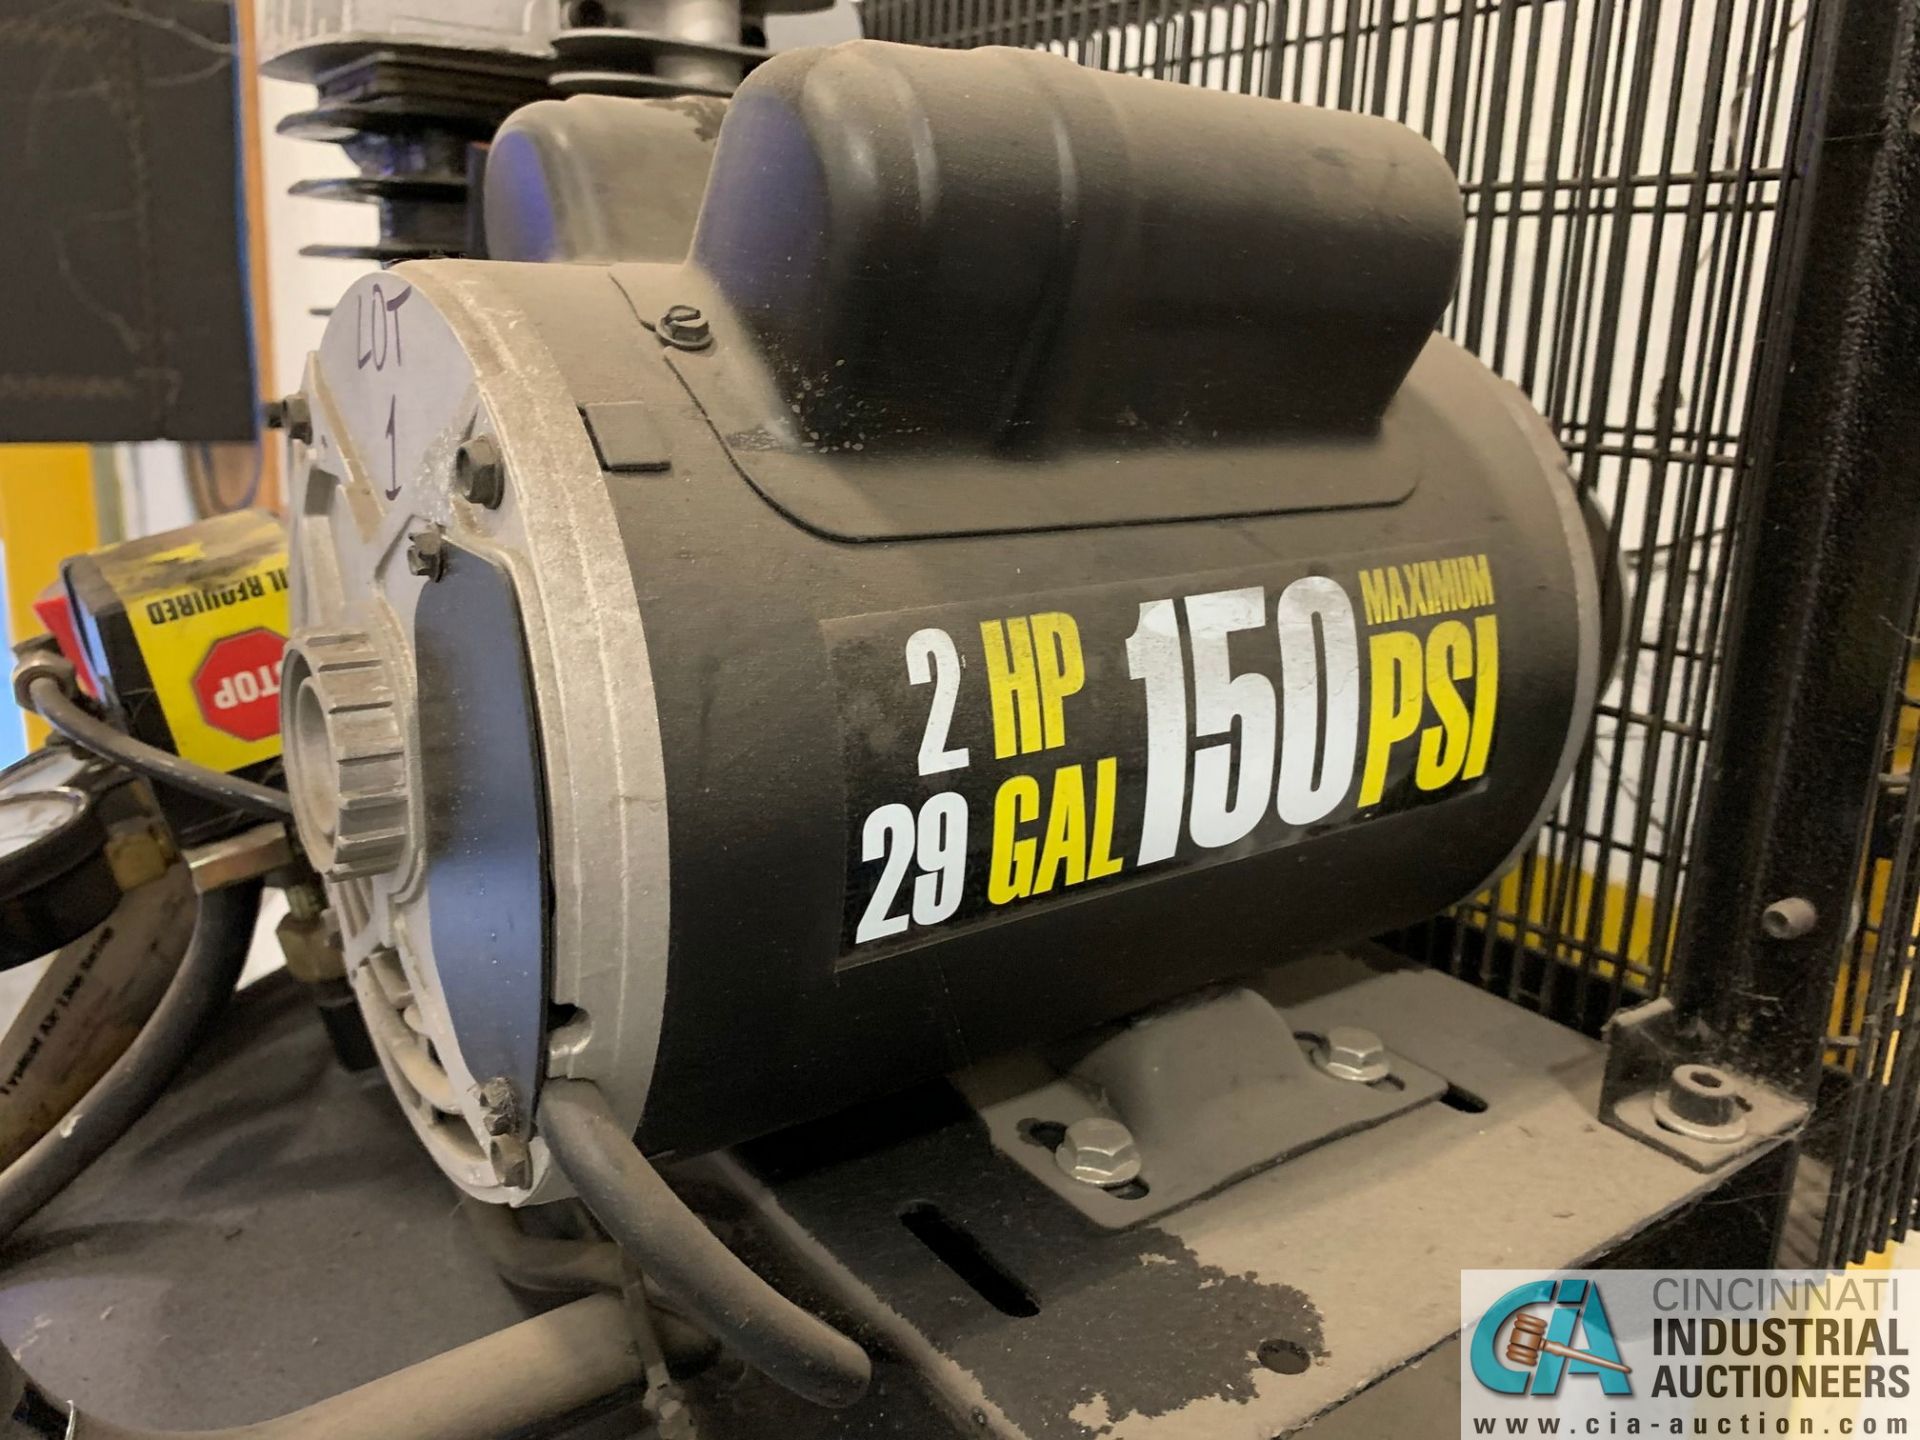 2-HP CENTRAL PNEUMATIC ITEM 61489 AIR COMPRESSOR; S/N 02957, 29-GALLON TANK, 150 MAX PSI (2015) ( - Image 5 of 7